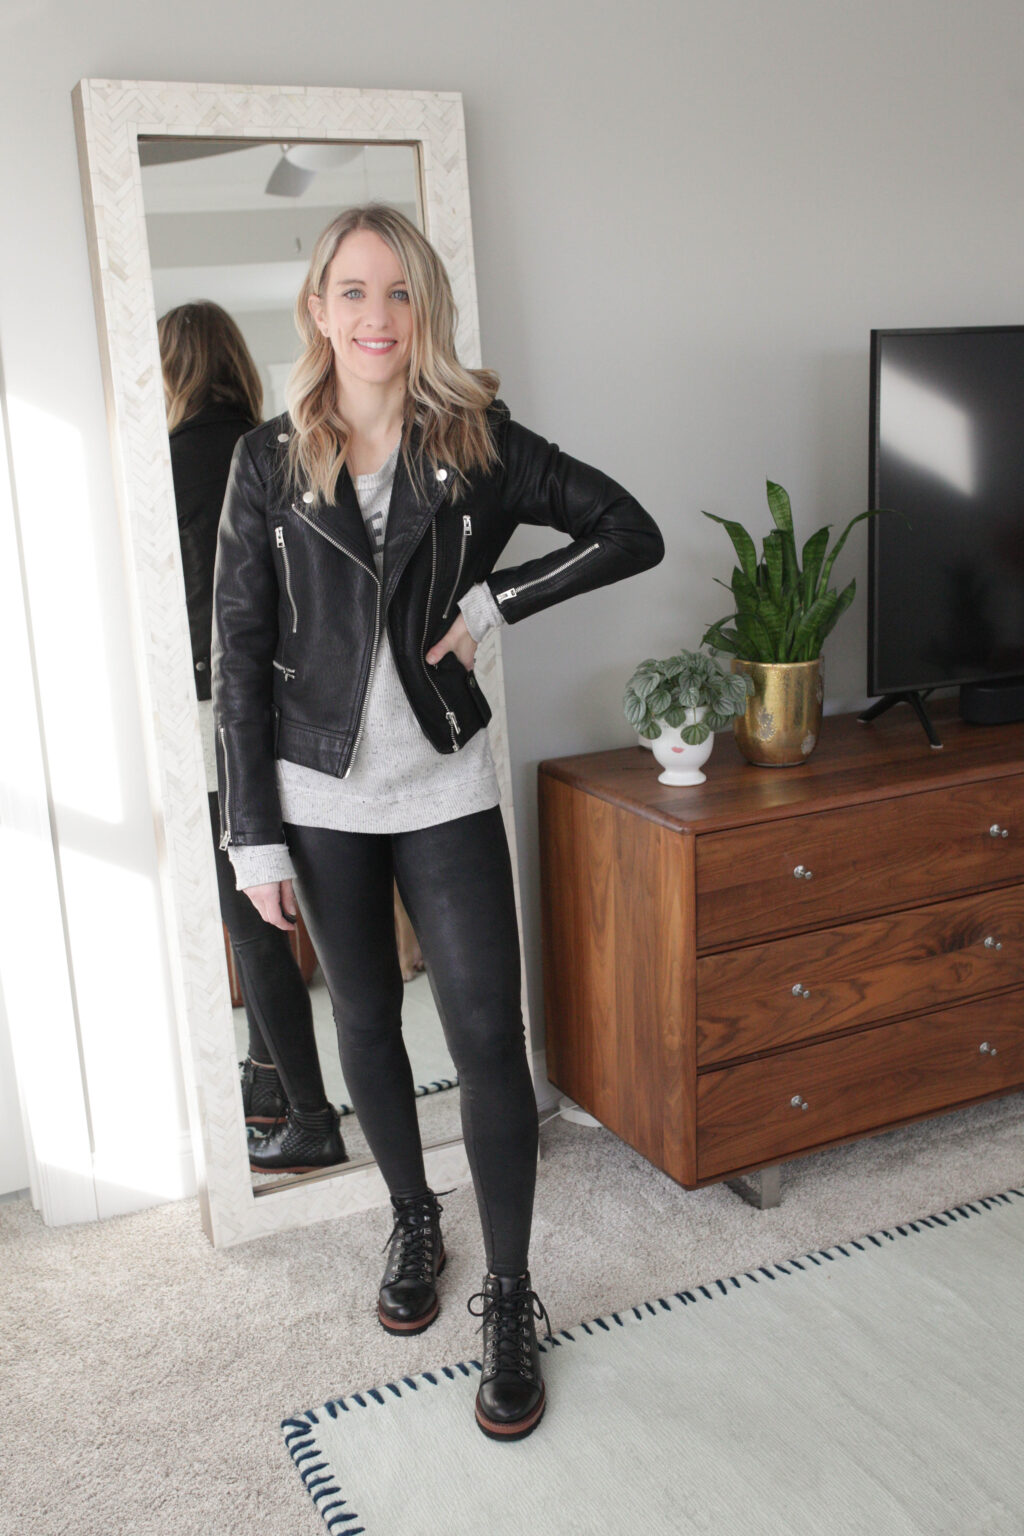 Black Leather Pants To Wear This Fall 2019 - LadyFashioniser.com  Leather pants  outfit night, Black leather pants, Comfy casual outfits